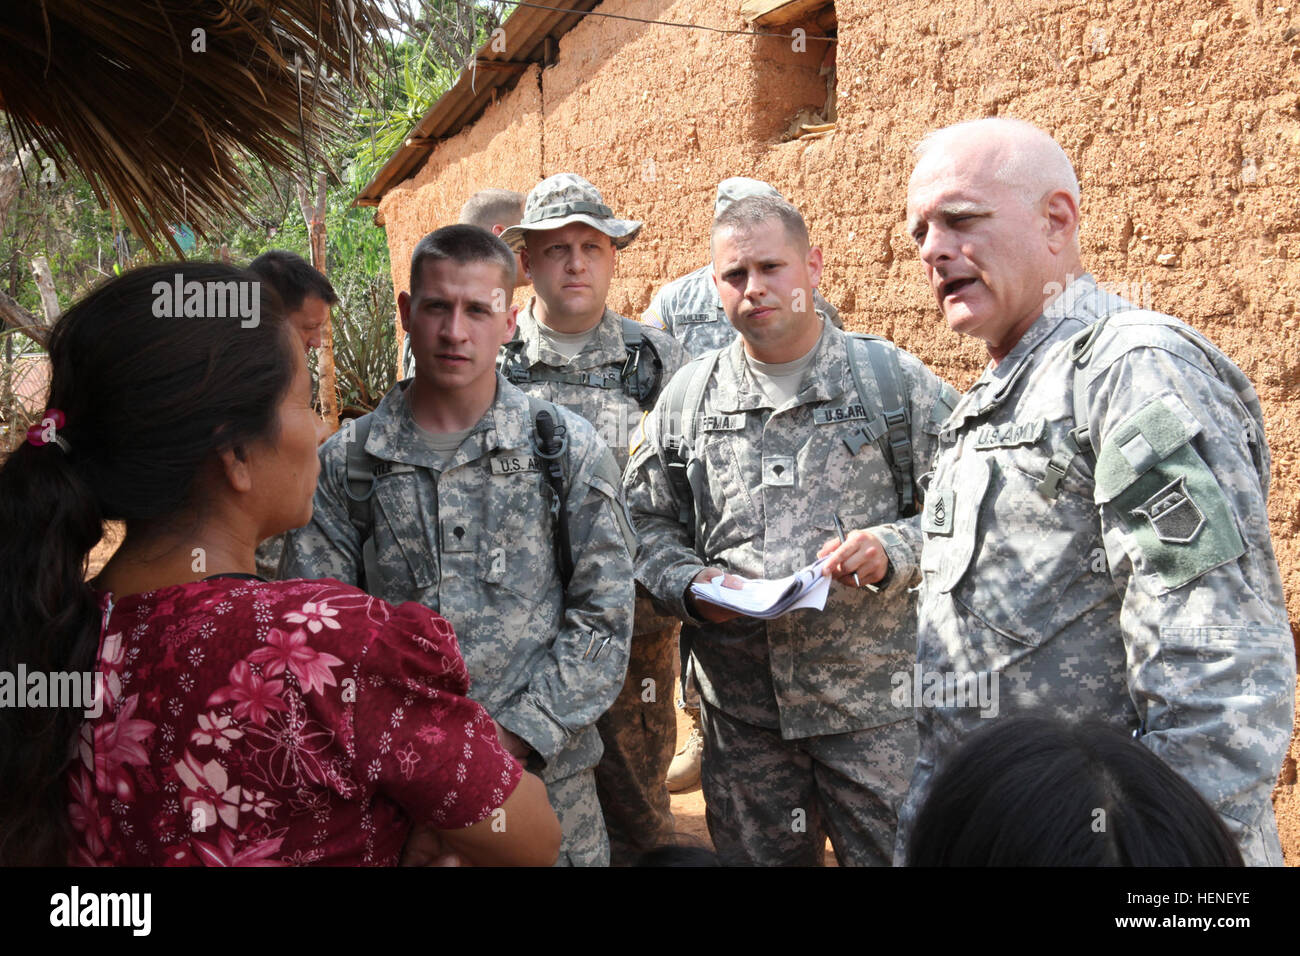 US Soldiers assigned to the 318th PsyOp Company, discusses with a local Guatemalan woman about a school building project  by US forces during Beyond the Horizon 2014, El Roble Concaste, Guatemala, Apr. 23, 2014. Beyond the Horizon is an annual exercise that embraces the partnership between the United States and Guatemala, to provide focused humanitarian assistance through various medical, dental, and civic action programs. (U.S. Army photo by Spc. Gary Silverman)(Released) Beyond the Horizon 2014, Guatemala 140423-A-TO648-056 Stock Photo